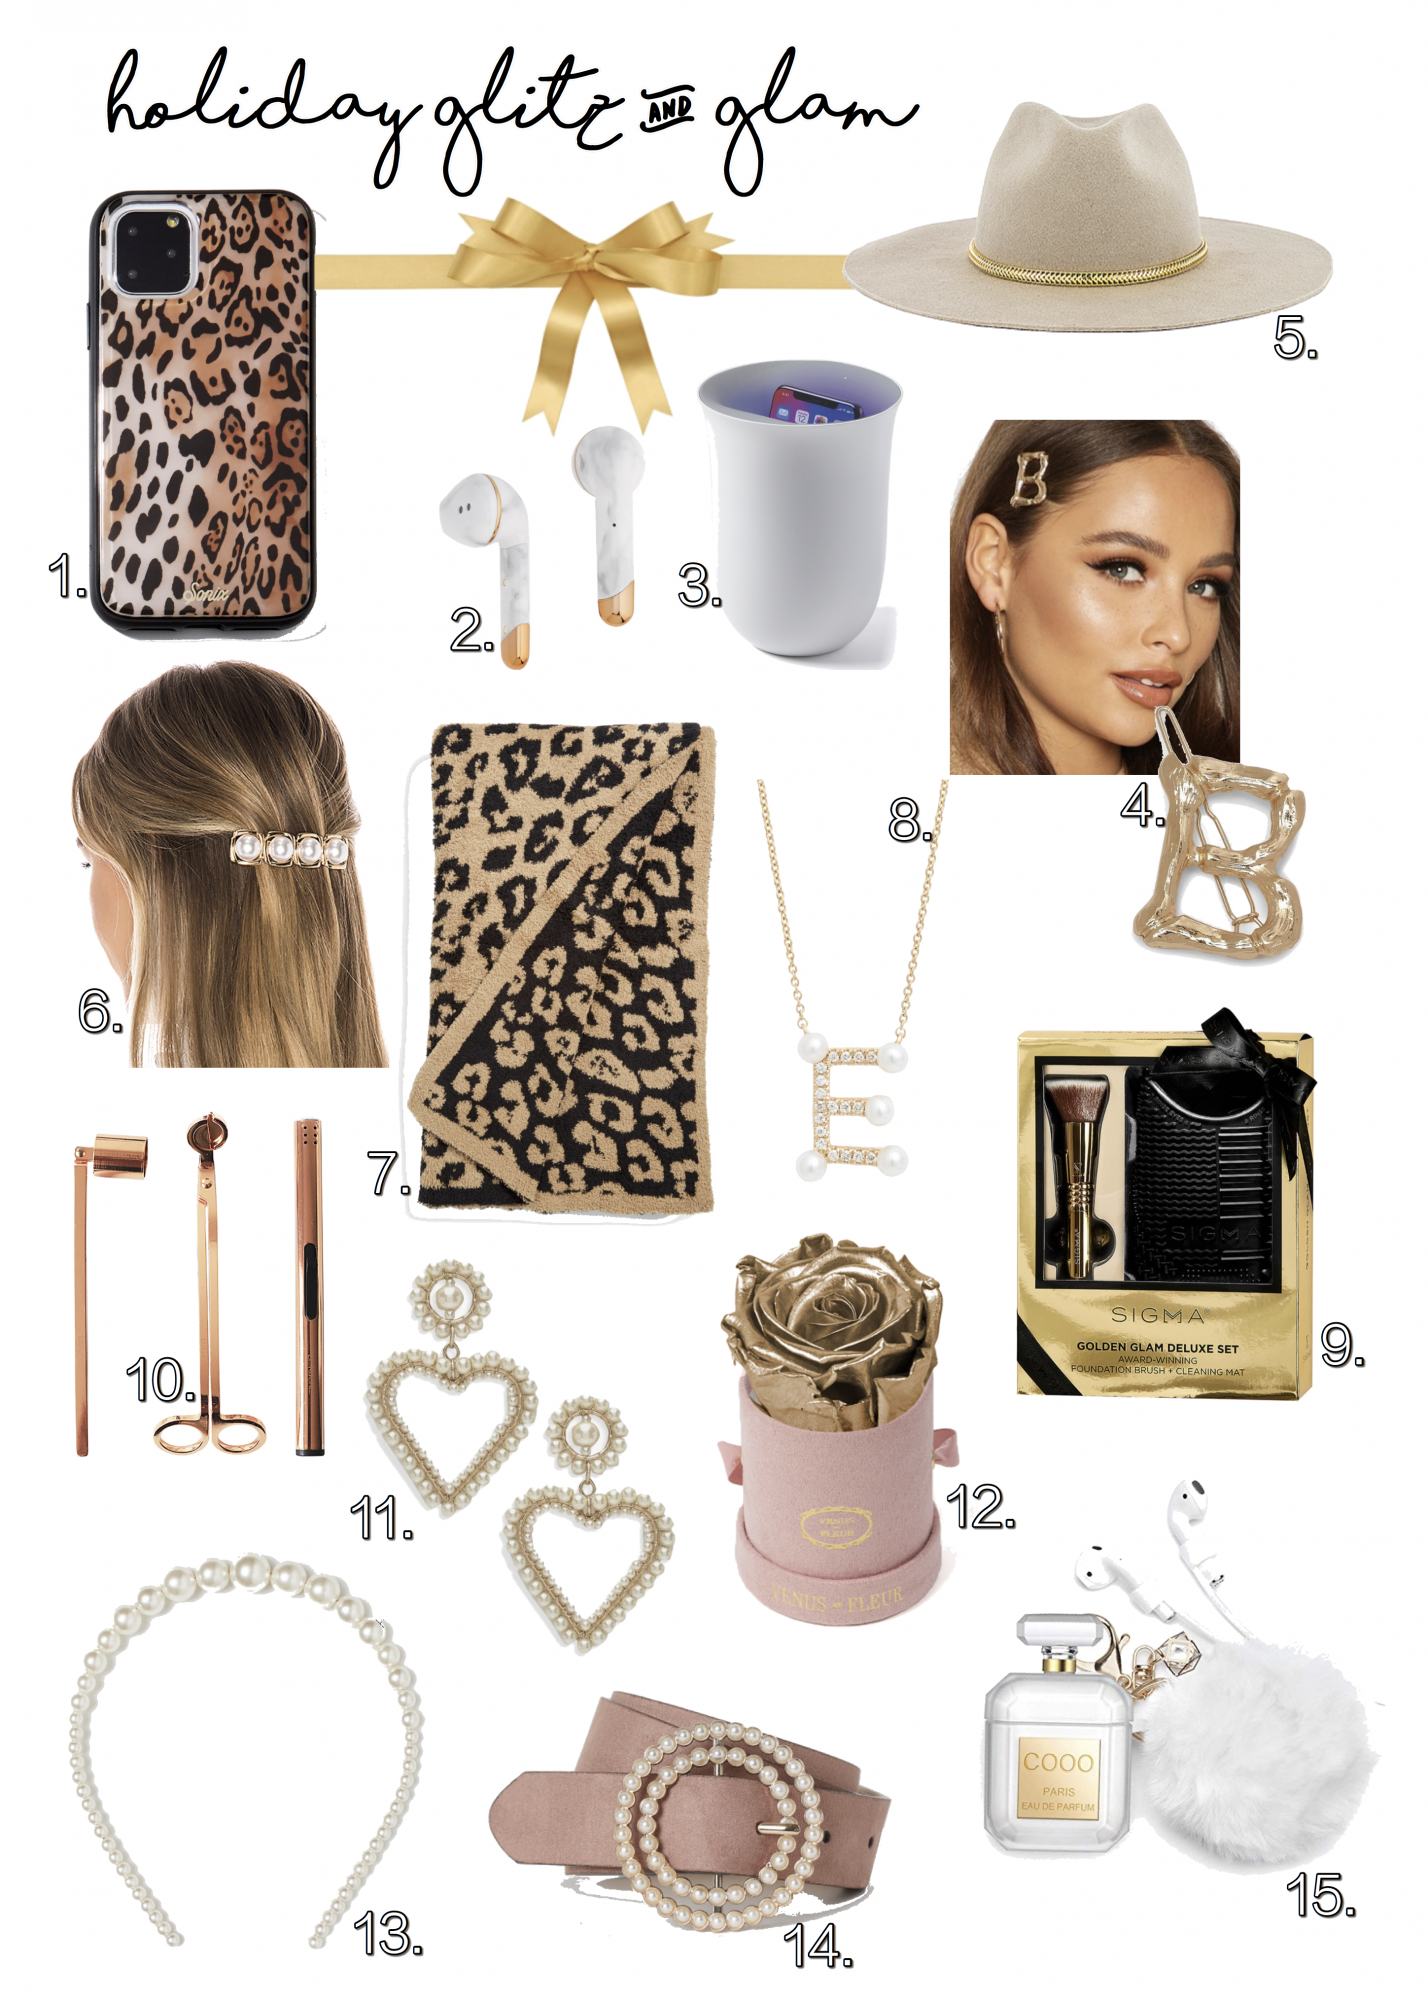 holiday gift guide 2019 emily gemma the sweetest thing blog | Glitz and Glam Gifts [👀Cute Things I've Got My Eyes On...] by popular Oklahoma life and style blog, The Sweetest Thing: collage image of LEOPARD PRINT IPHONE 11 PHONE PRO CASE, MARBLE EAR PODS, PHONE SANITIZER, BAMBOO INITIAL HAIR CLIP, HAT WITH GOLD CHAIN, PEARL HAIR CLIP, LEOPARD BLANKET, PEARL INITIAL NECKLACE, SIGMA BEAUTY GLAM GIFT SET, CANDLE ACCESSORY SET, PEARL HEART EARRINGS, VENUS ET FLEUR MINI ROSE BOX, PEARL HEADBAND, PEARL BUCKLE BELT and AIRPOD CASE WITH KEYCHAIN